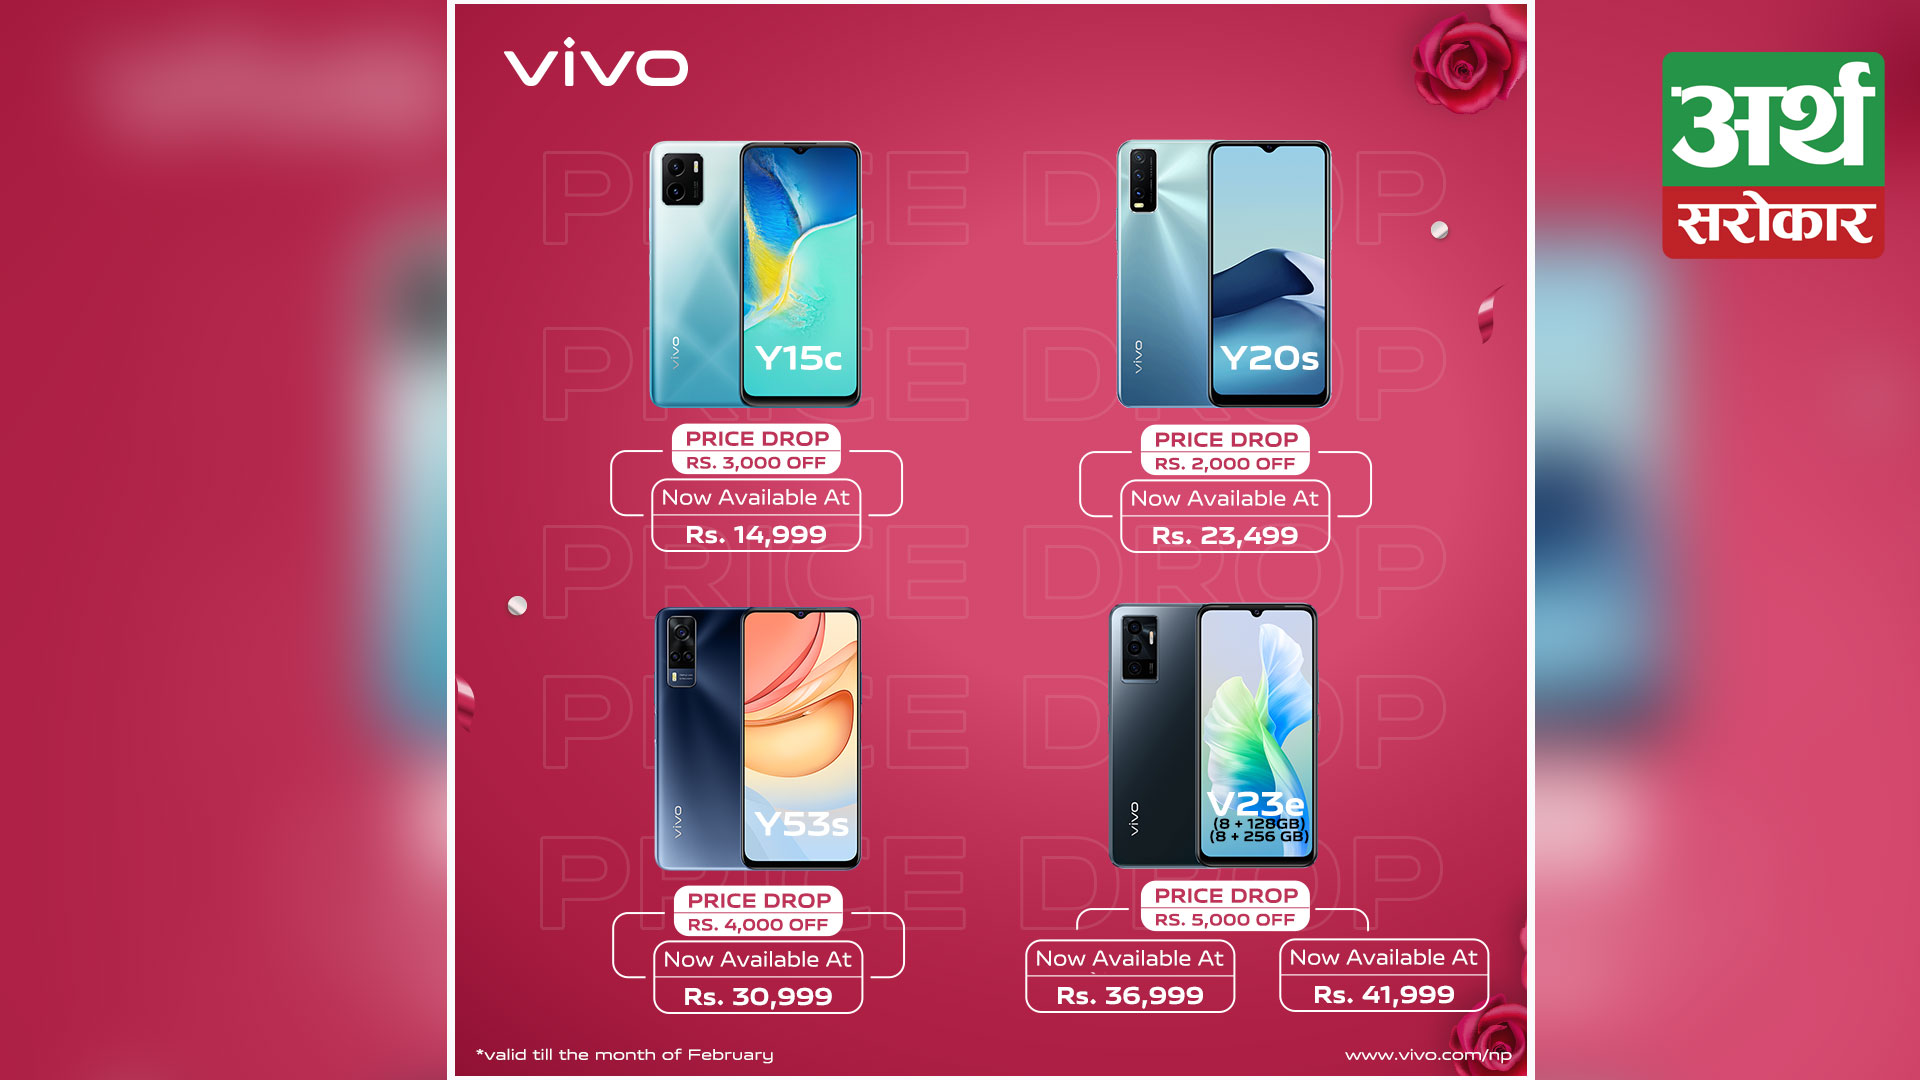 Surprise your special one on Valentine’s Day with vivo’s exciting deal